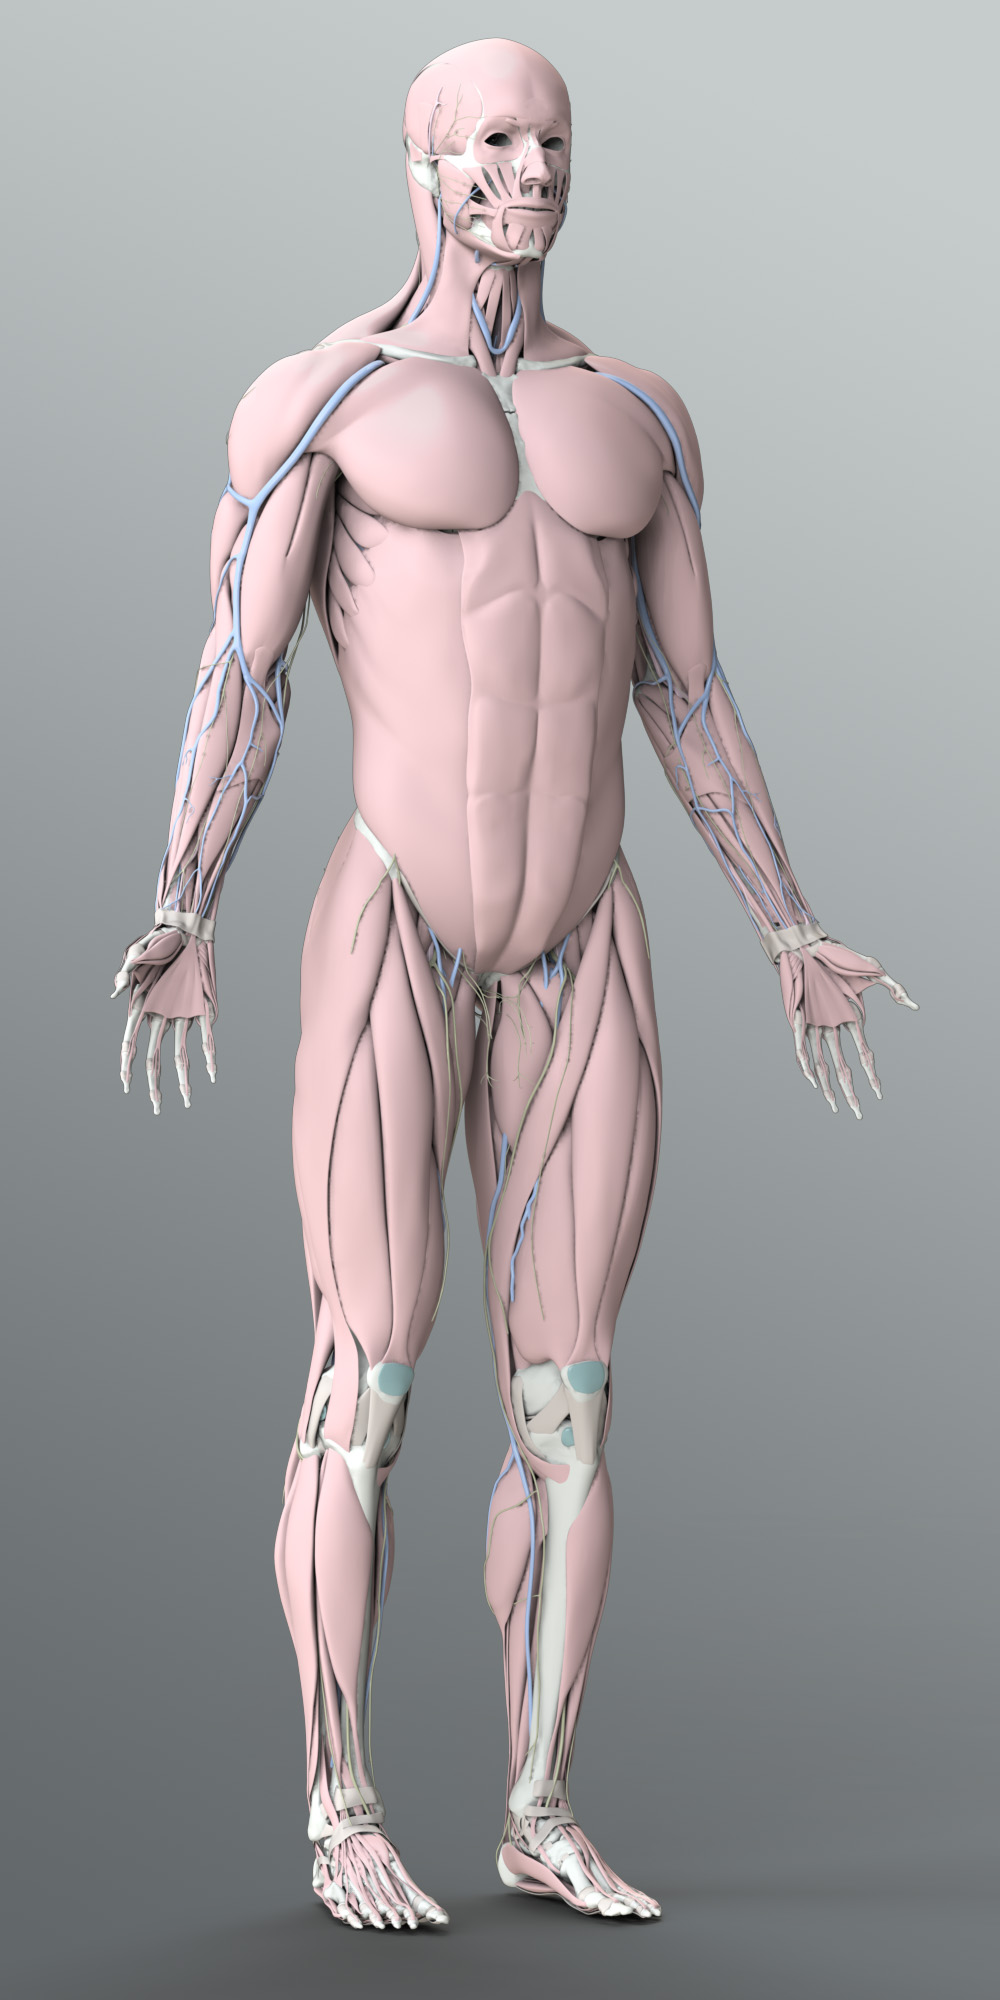 Zygote::Solid 3D Male Organs Model | Medically Accurate 